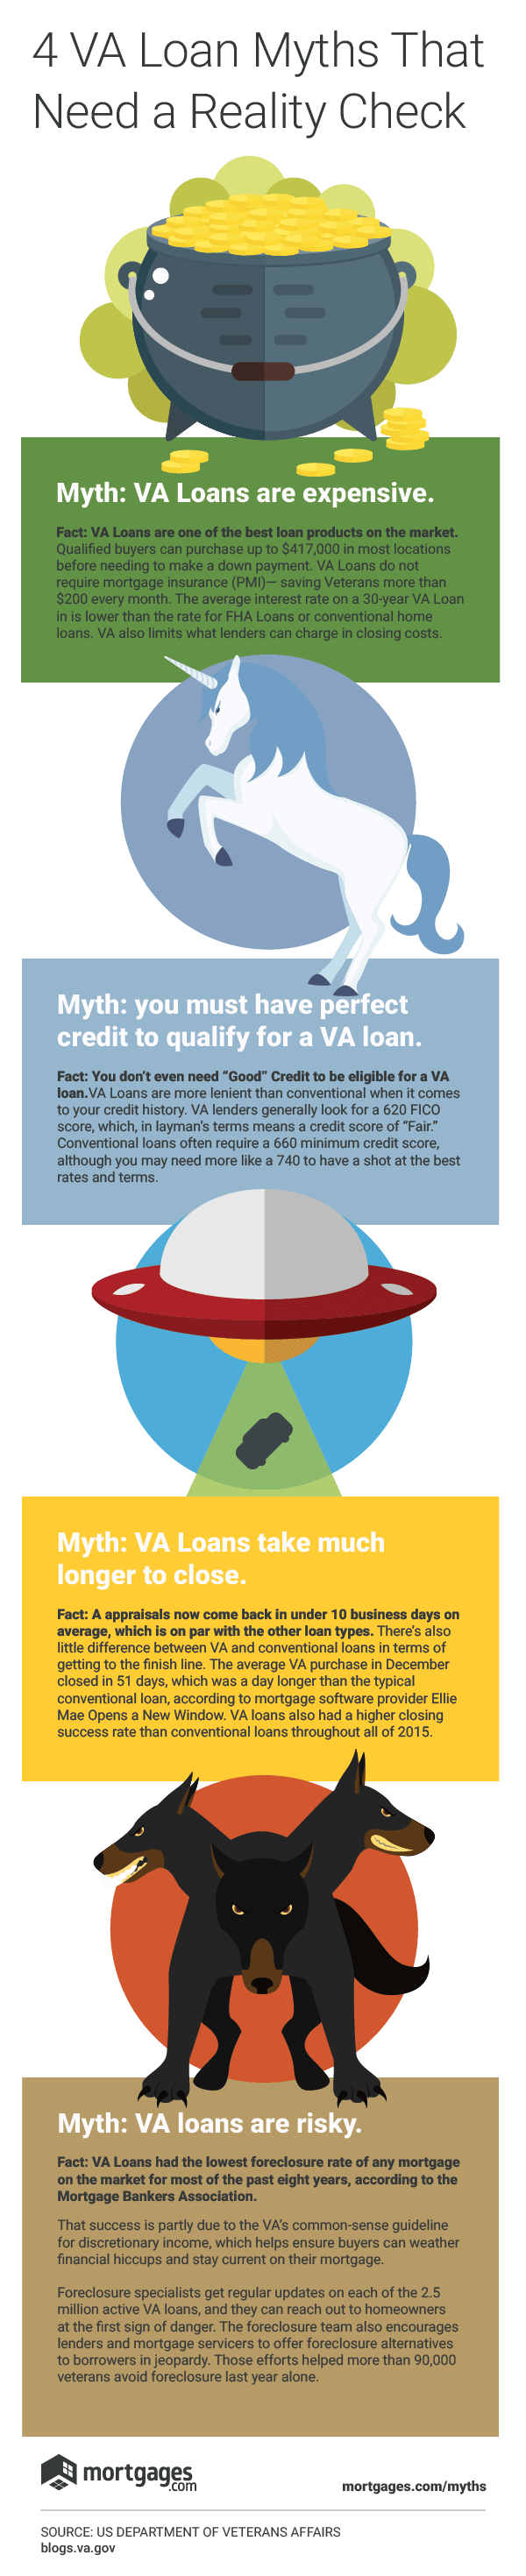 Who pays closing costs on VA loan?